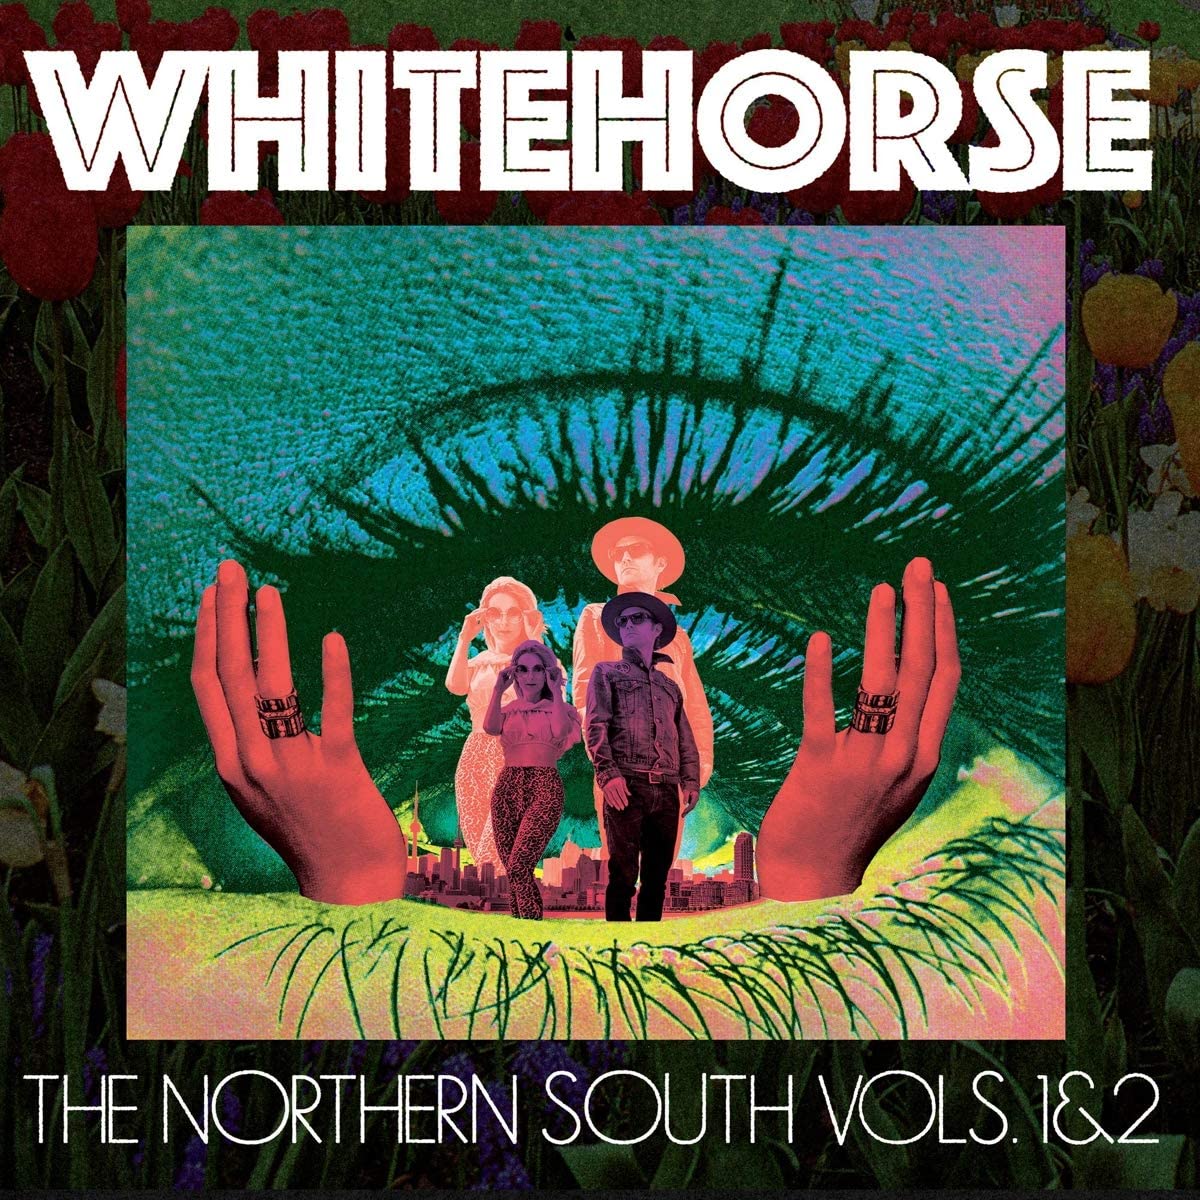 Whitehorse_-_The_Northern_South_Vols._1_2.jpg